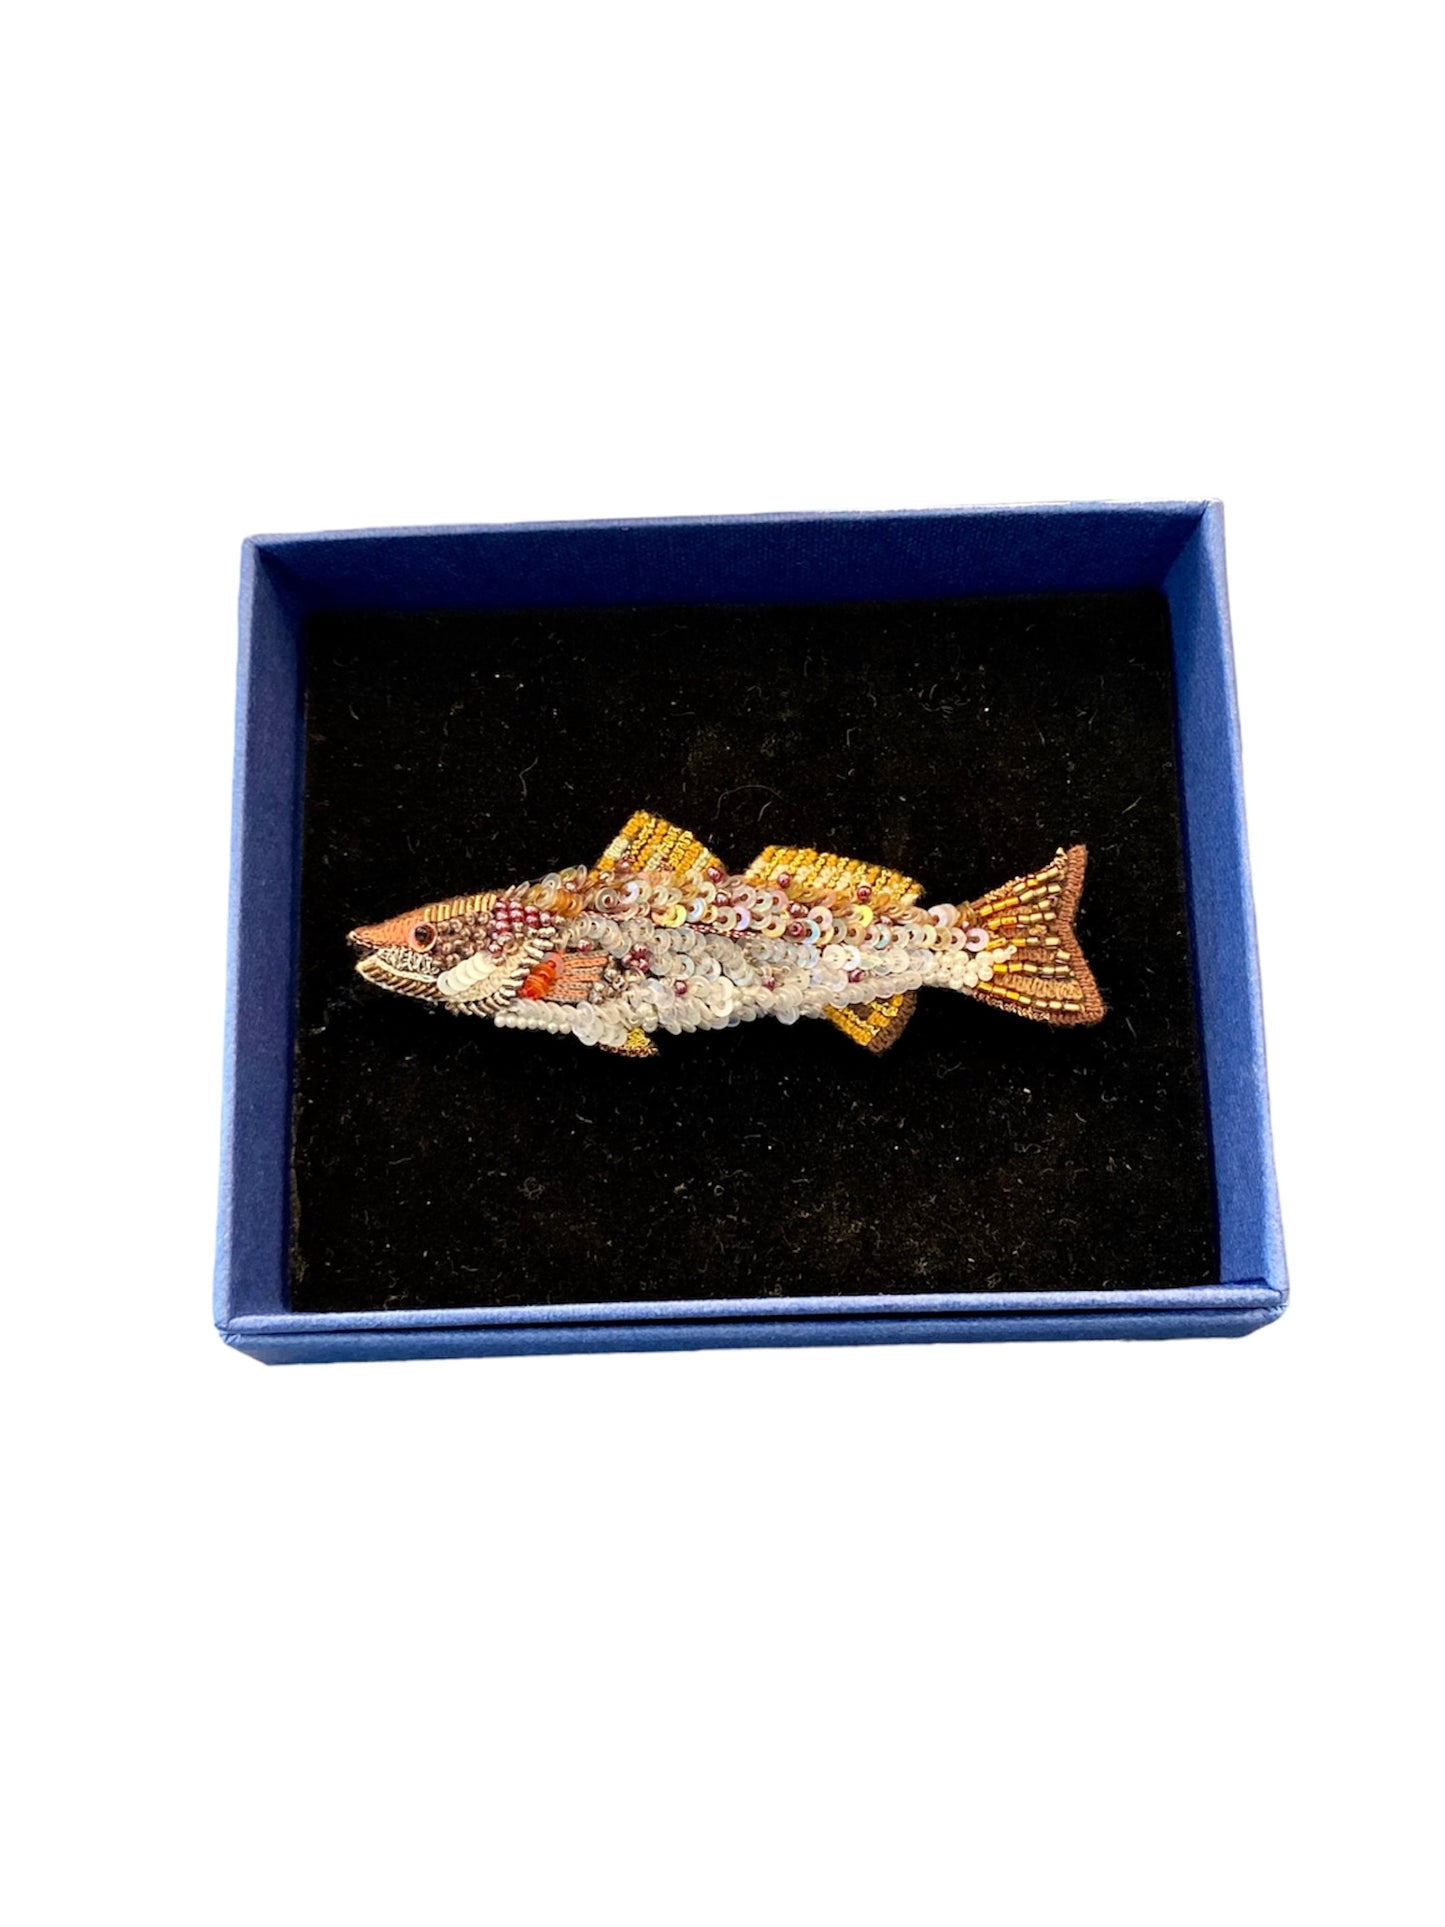 Hand-Beaded Spotted Sea Trout Brooch Pin